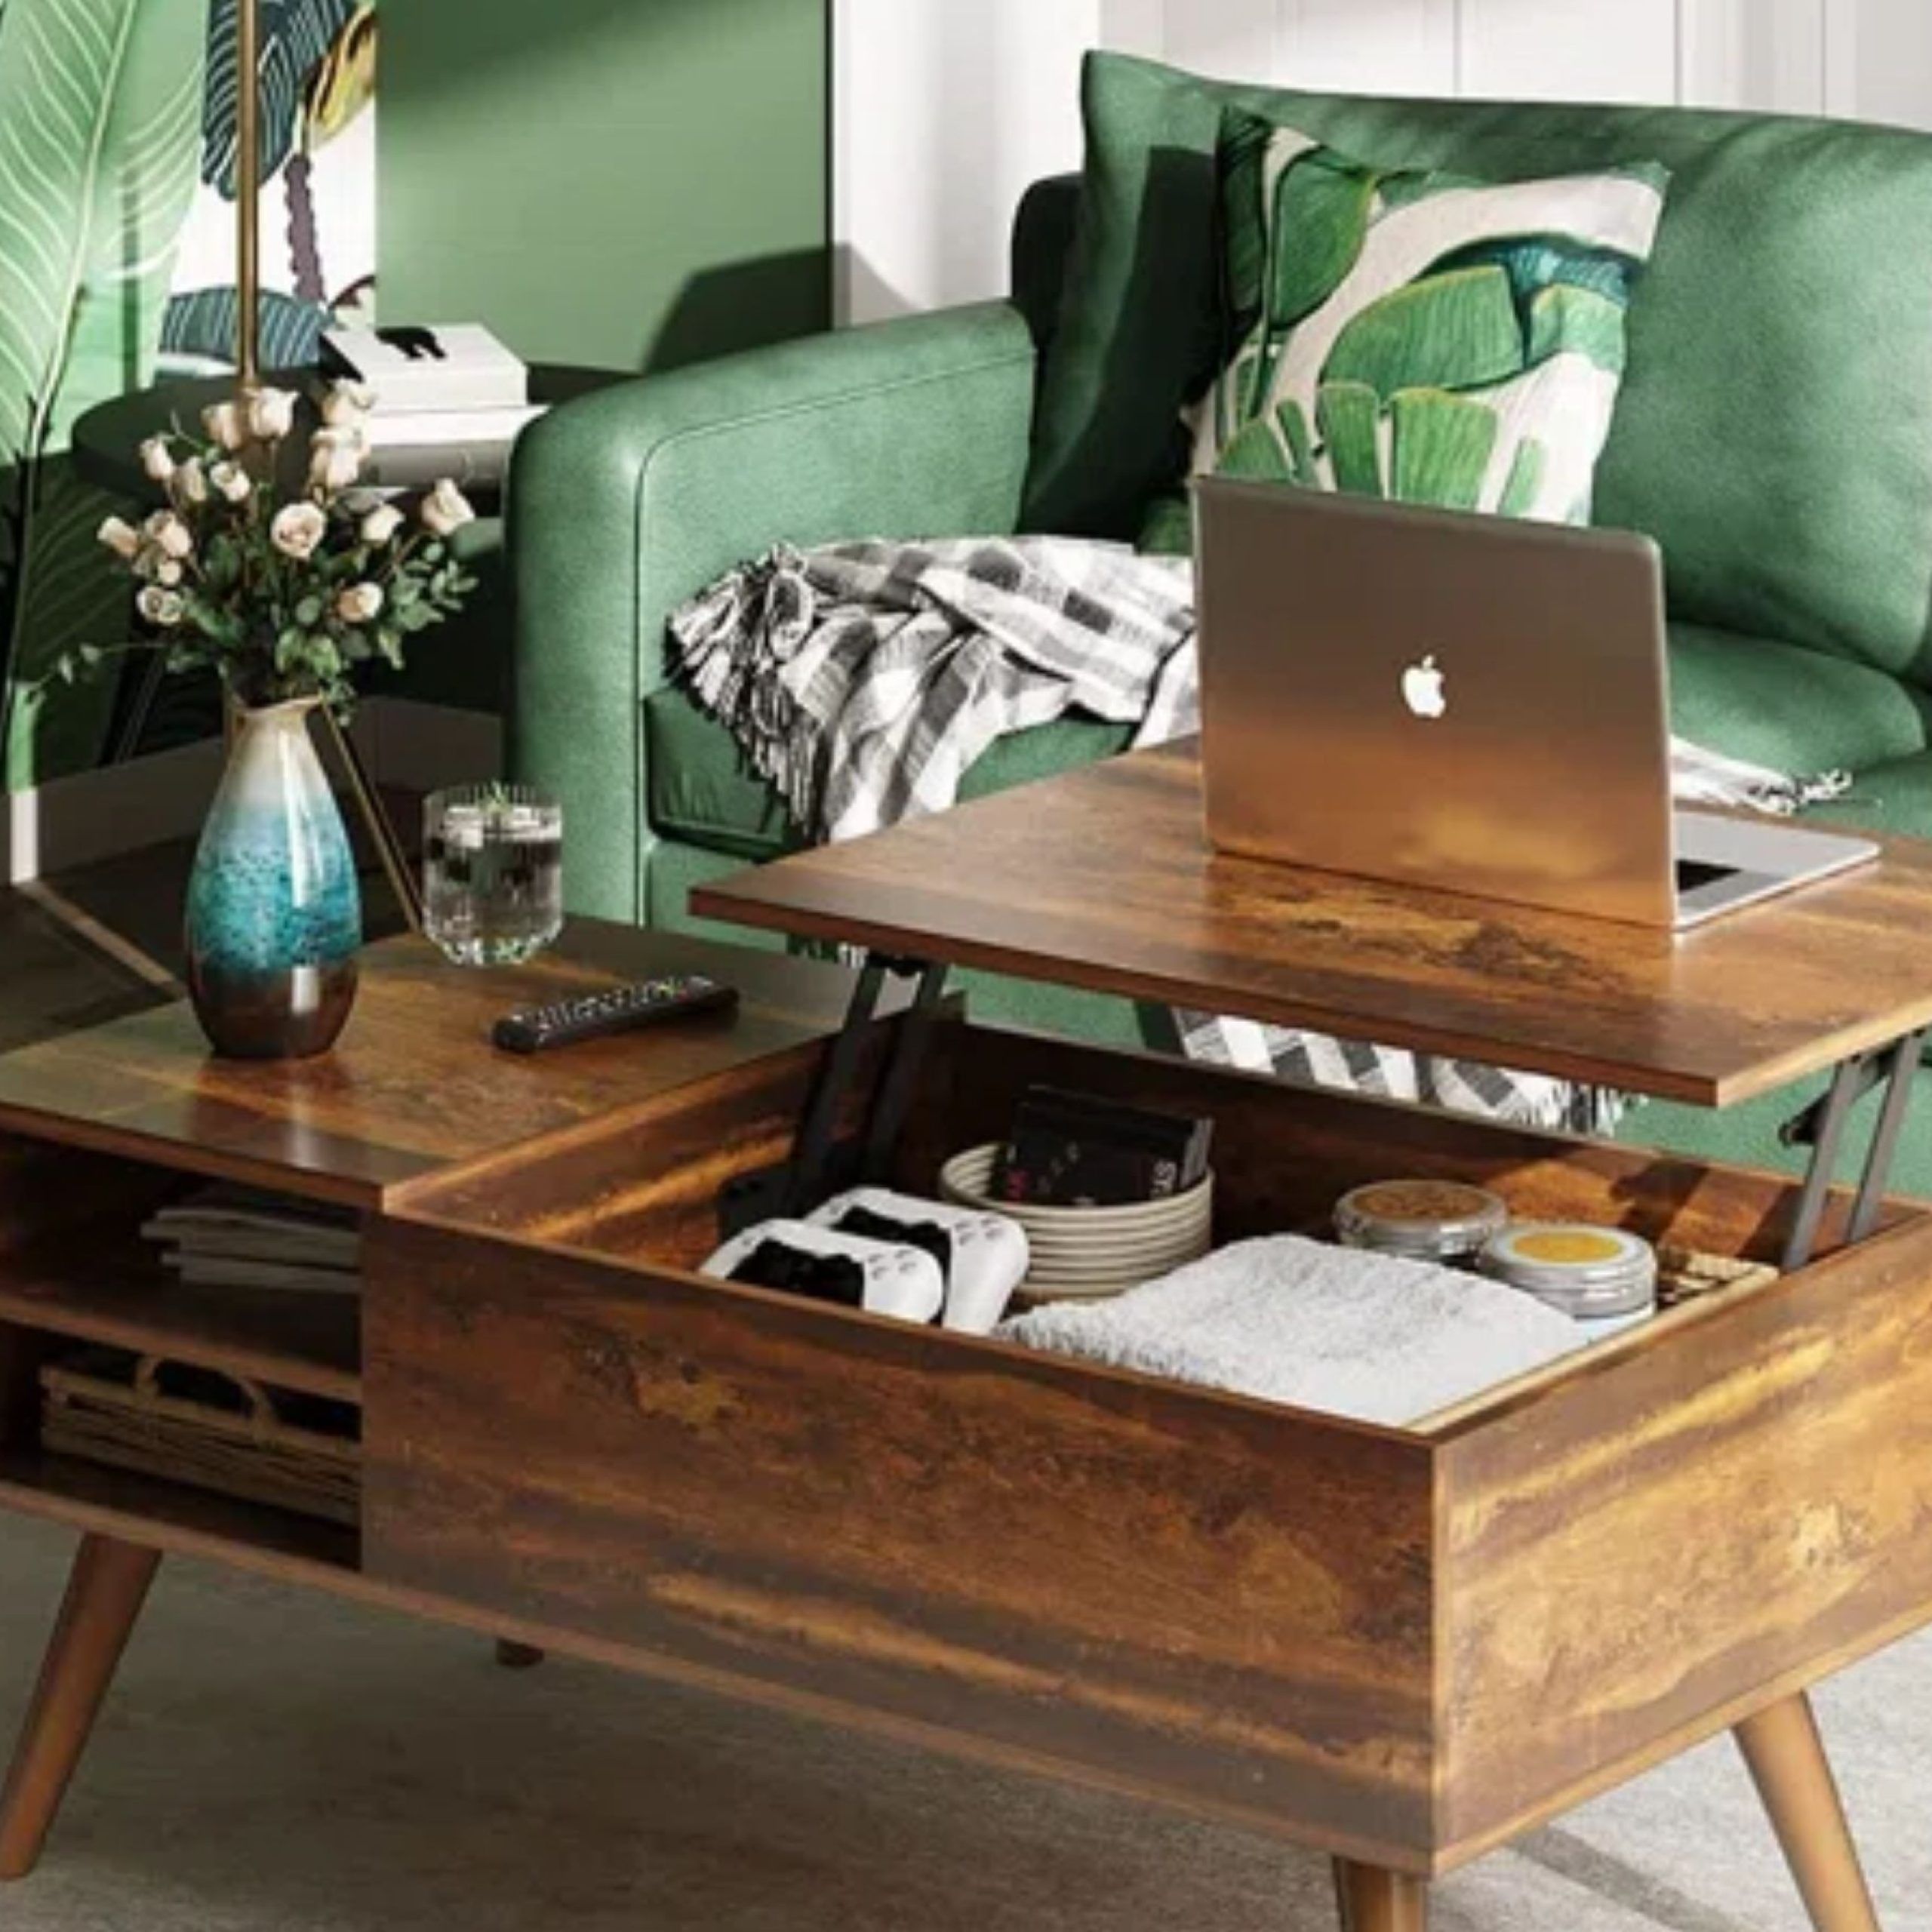 Best Lift Top Coffee Tables: 14 Buys Perfect For Small Spaces | Real Homes Regarding Lift Top Coffee Tables With Shelves (View 11 of 15)